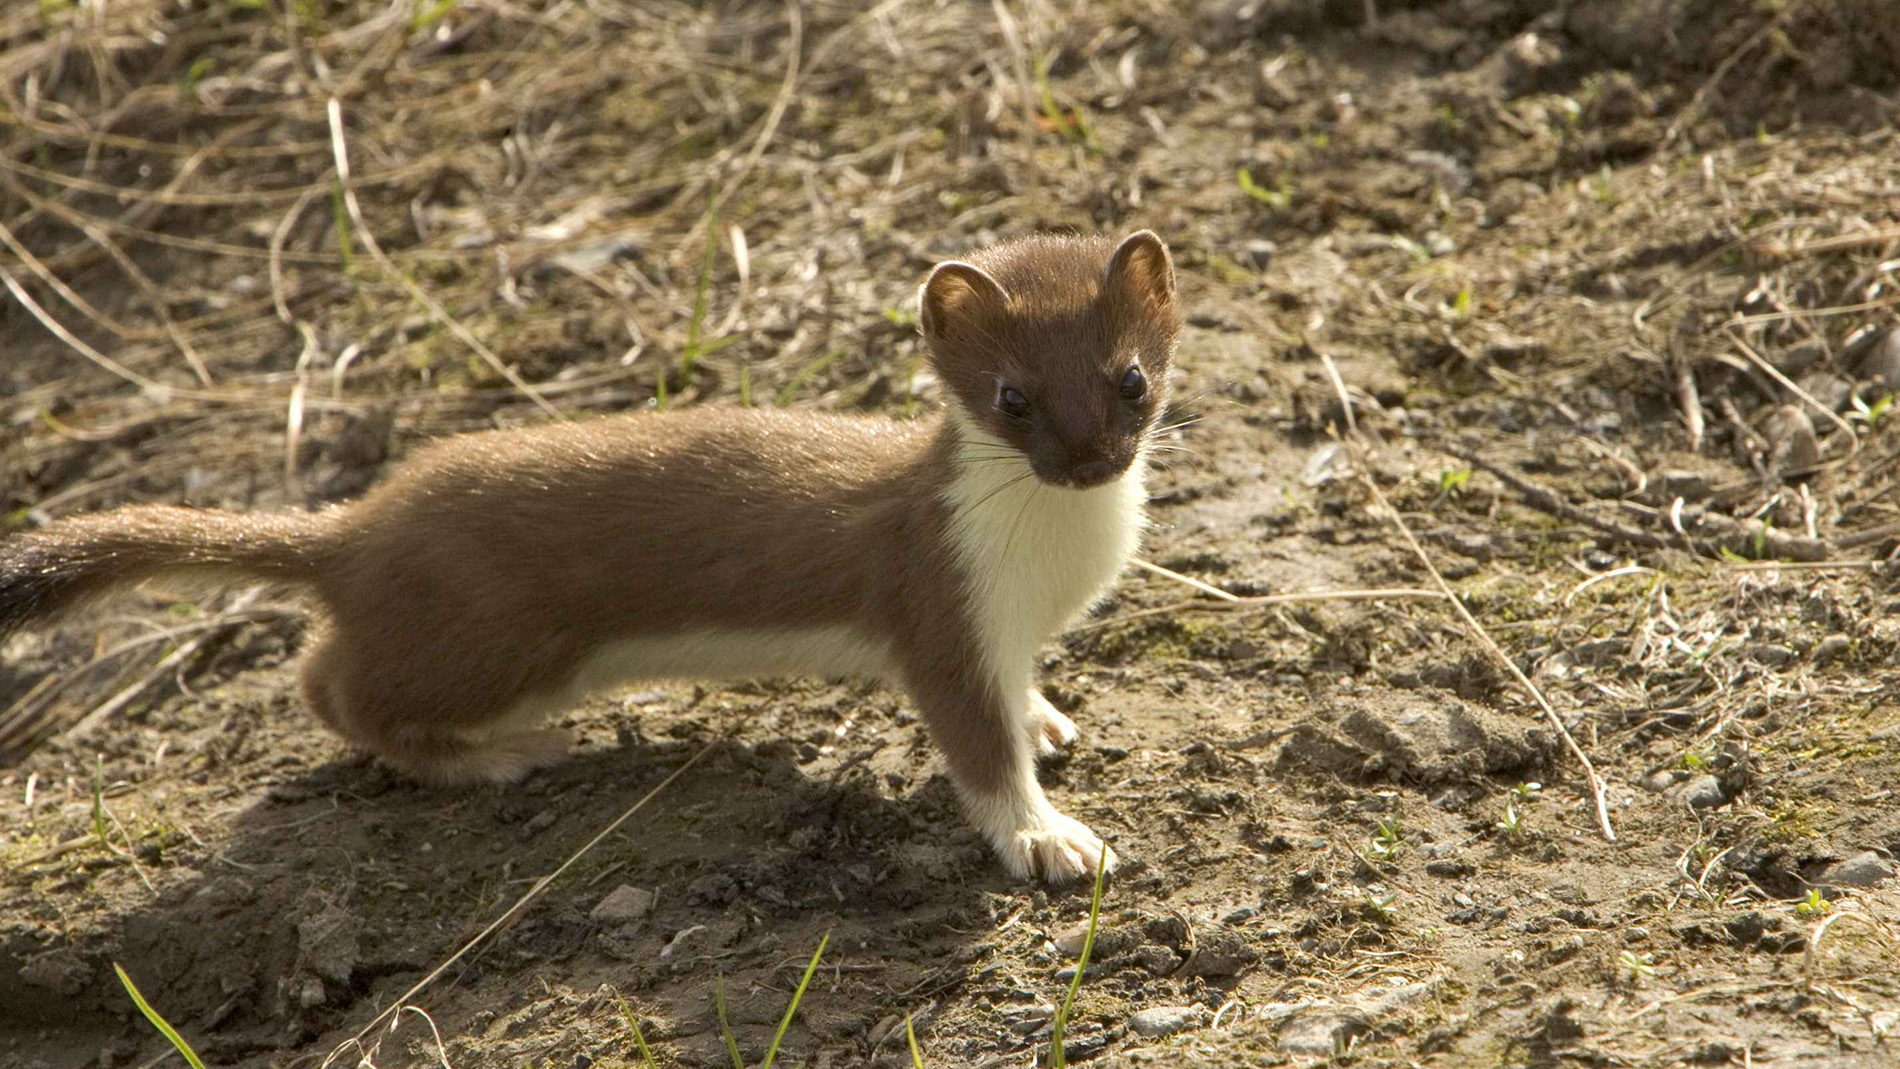 Image of stoat (mustela erminea) - Photo by Steve Hillebrand (US Fish and Wildlife Service) from pixnio.com